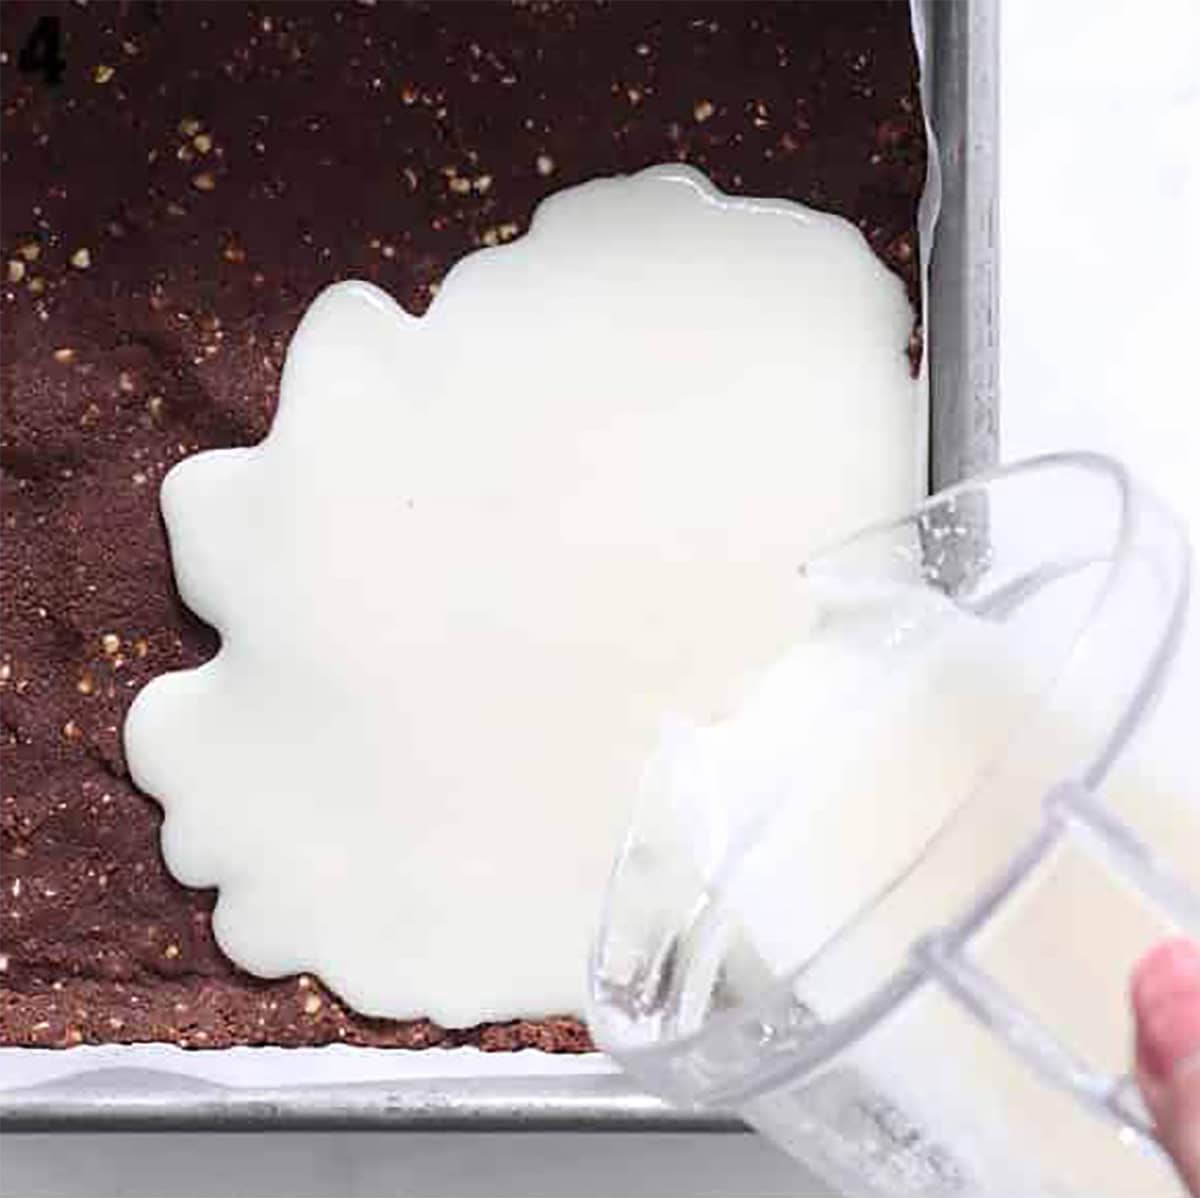 coconut layer poured on chocolate coconut bar.